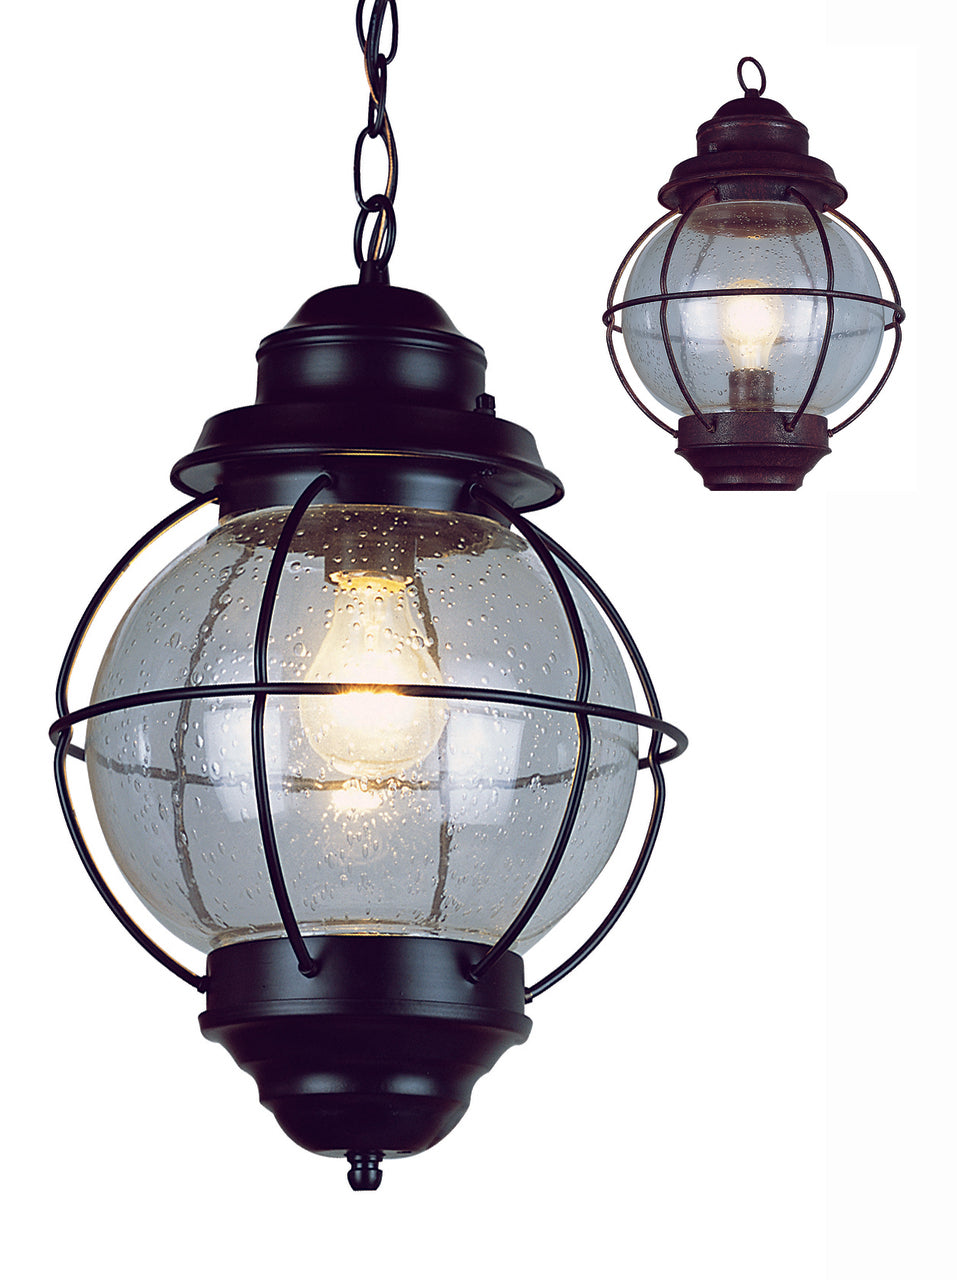 Trans Globe Lighting 69906 RBZ Catalina 19" Outdoor Rustic Bronze Nautical Hanging Lantern with Round Seeded Glass Design